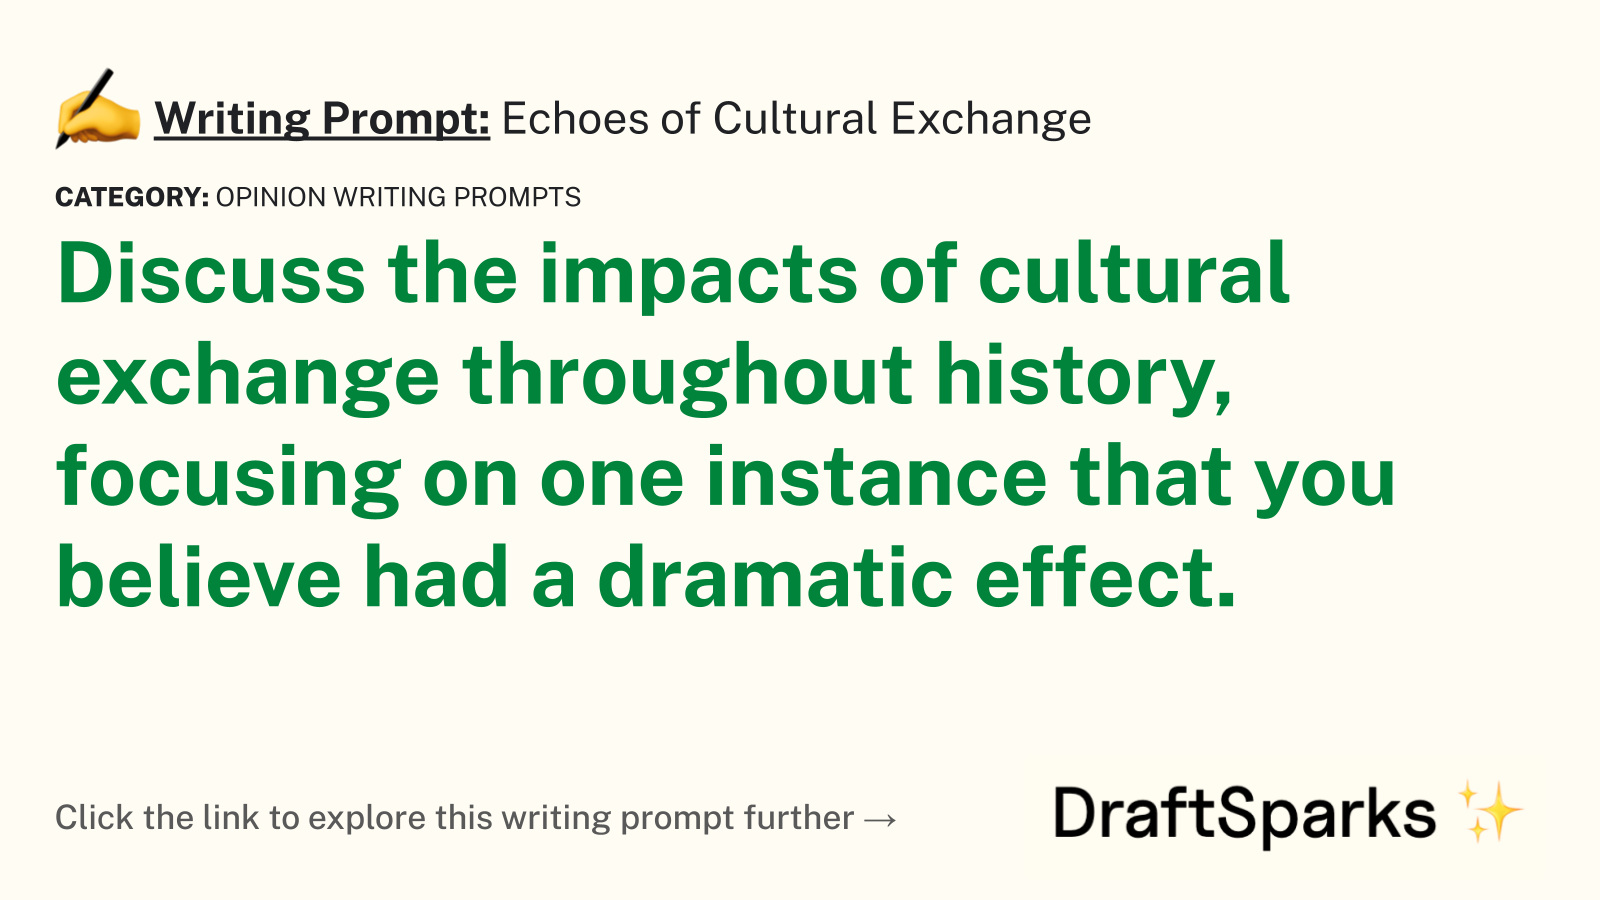 Echoes of Cultural Exchange